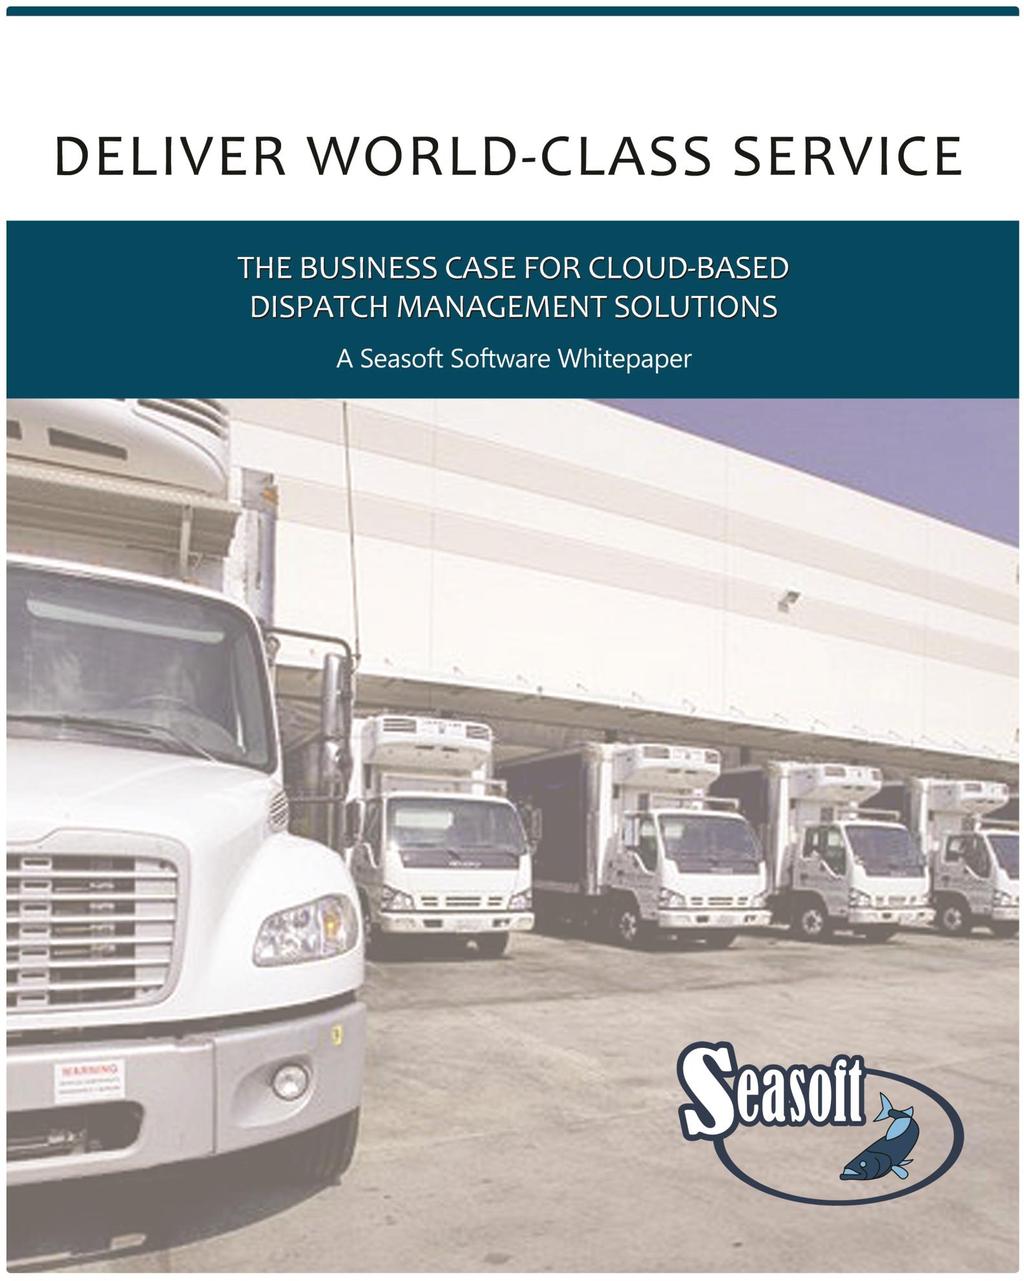 Seasoft Software The Business Case for Cloud-based Dispatch Management Solutions 1